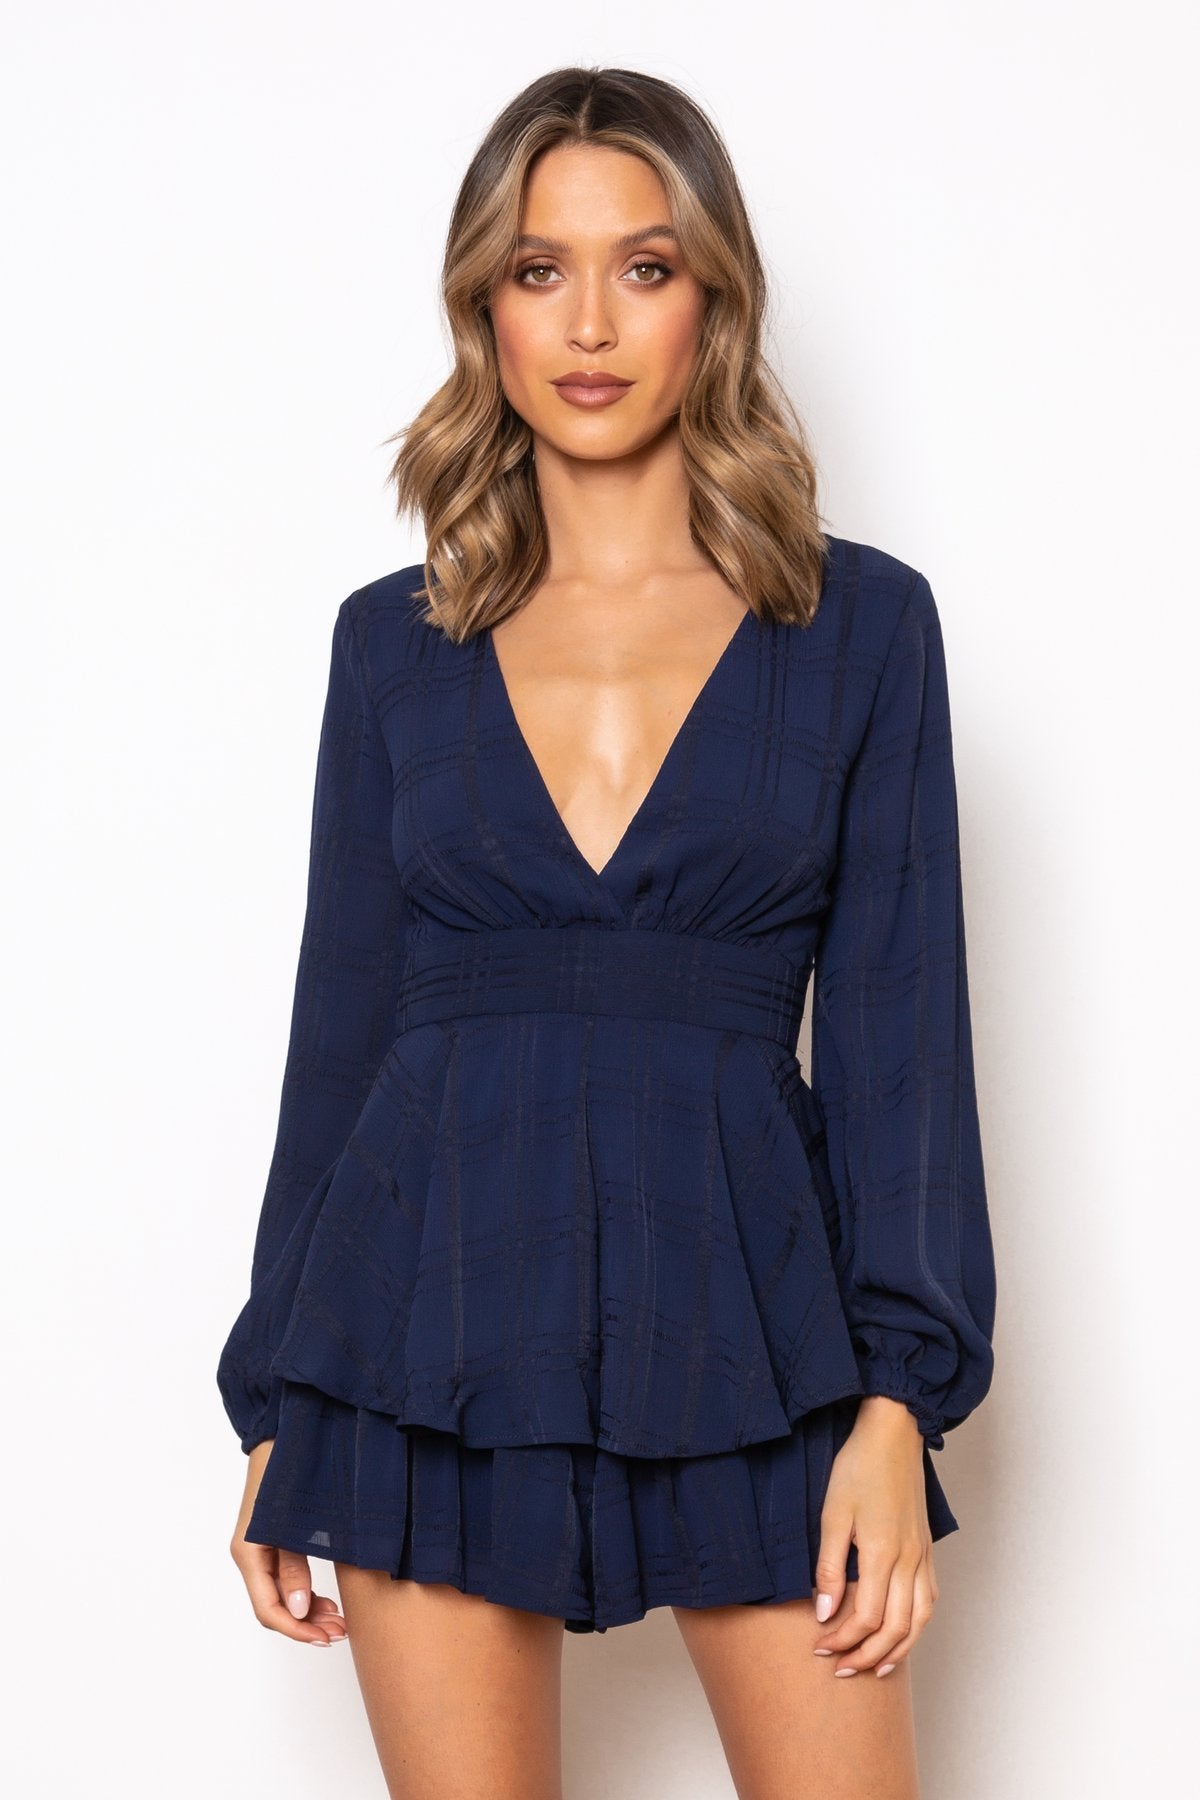 Fashion Navy Checkered Ruffle Tie-Up Romper with Bell Sleeve